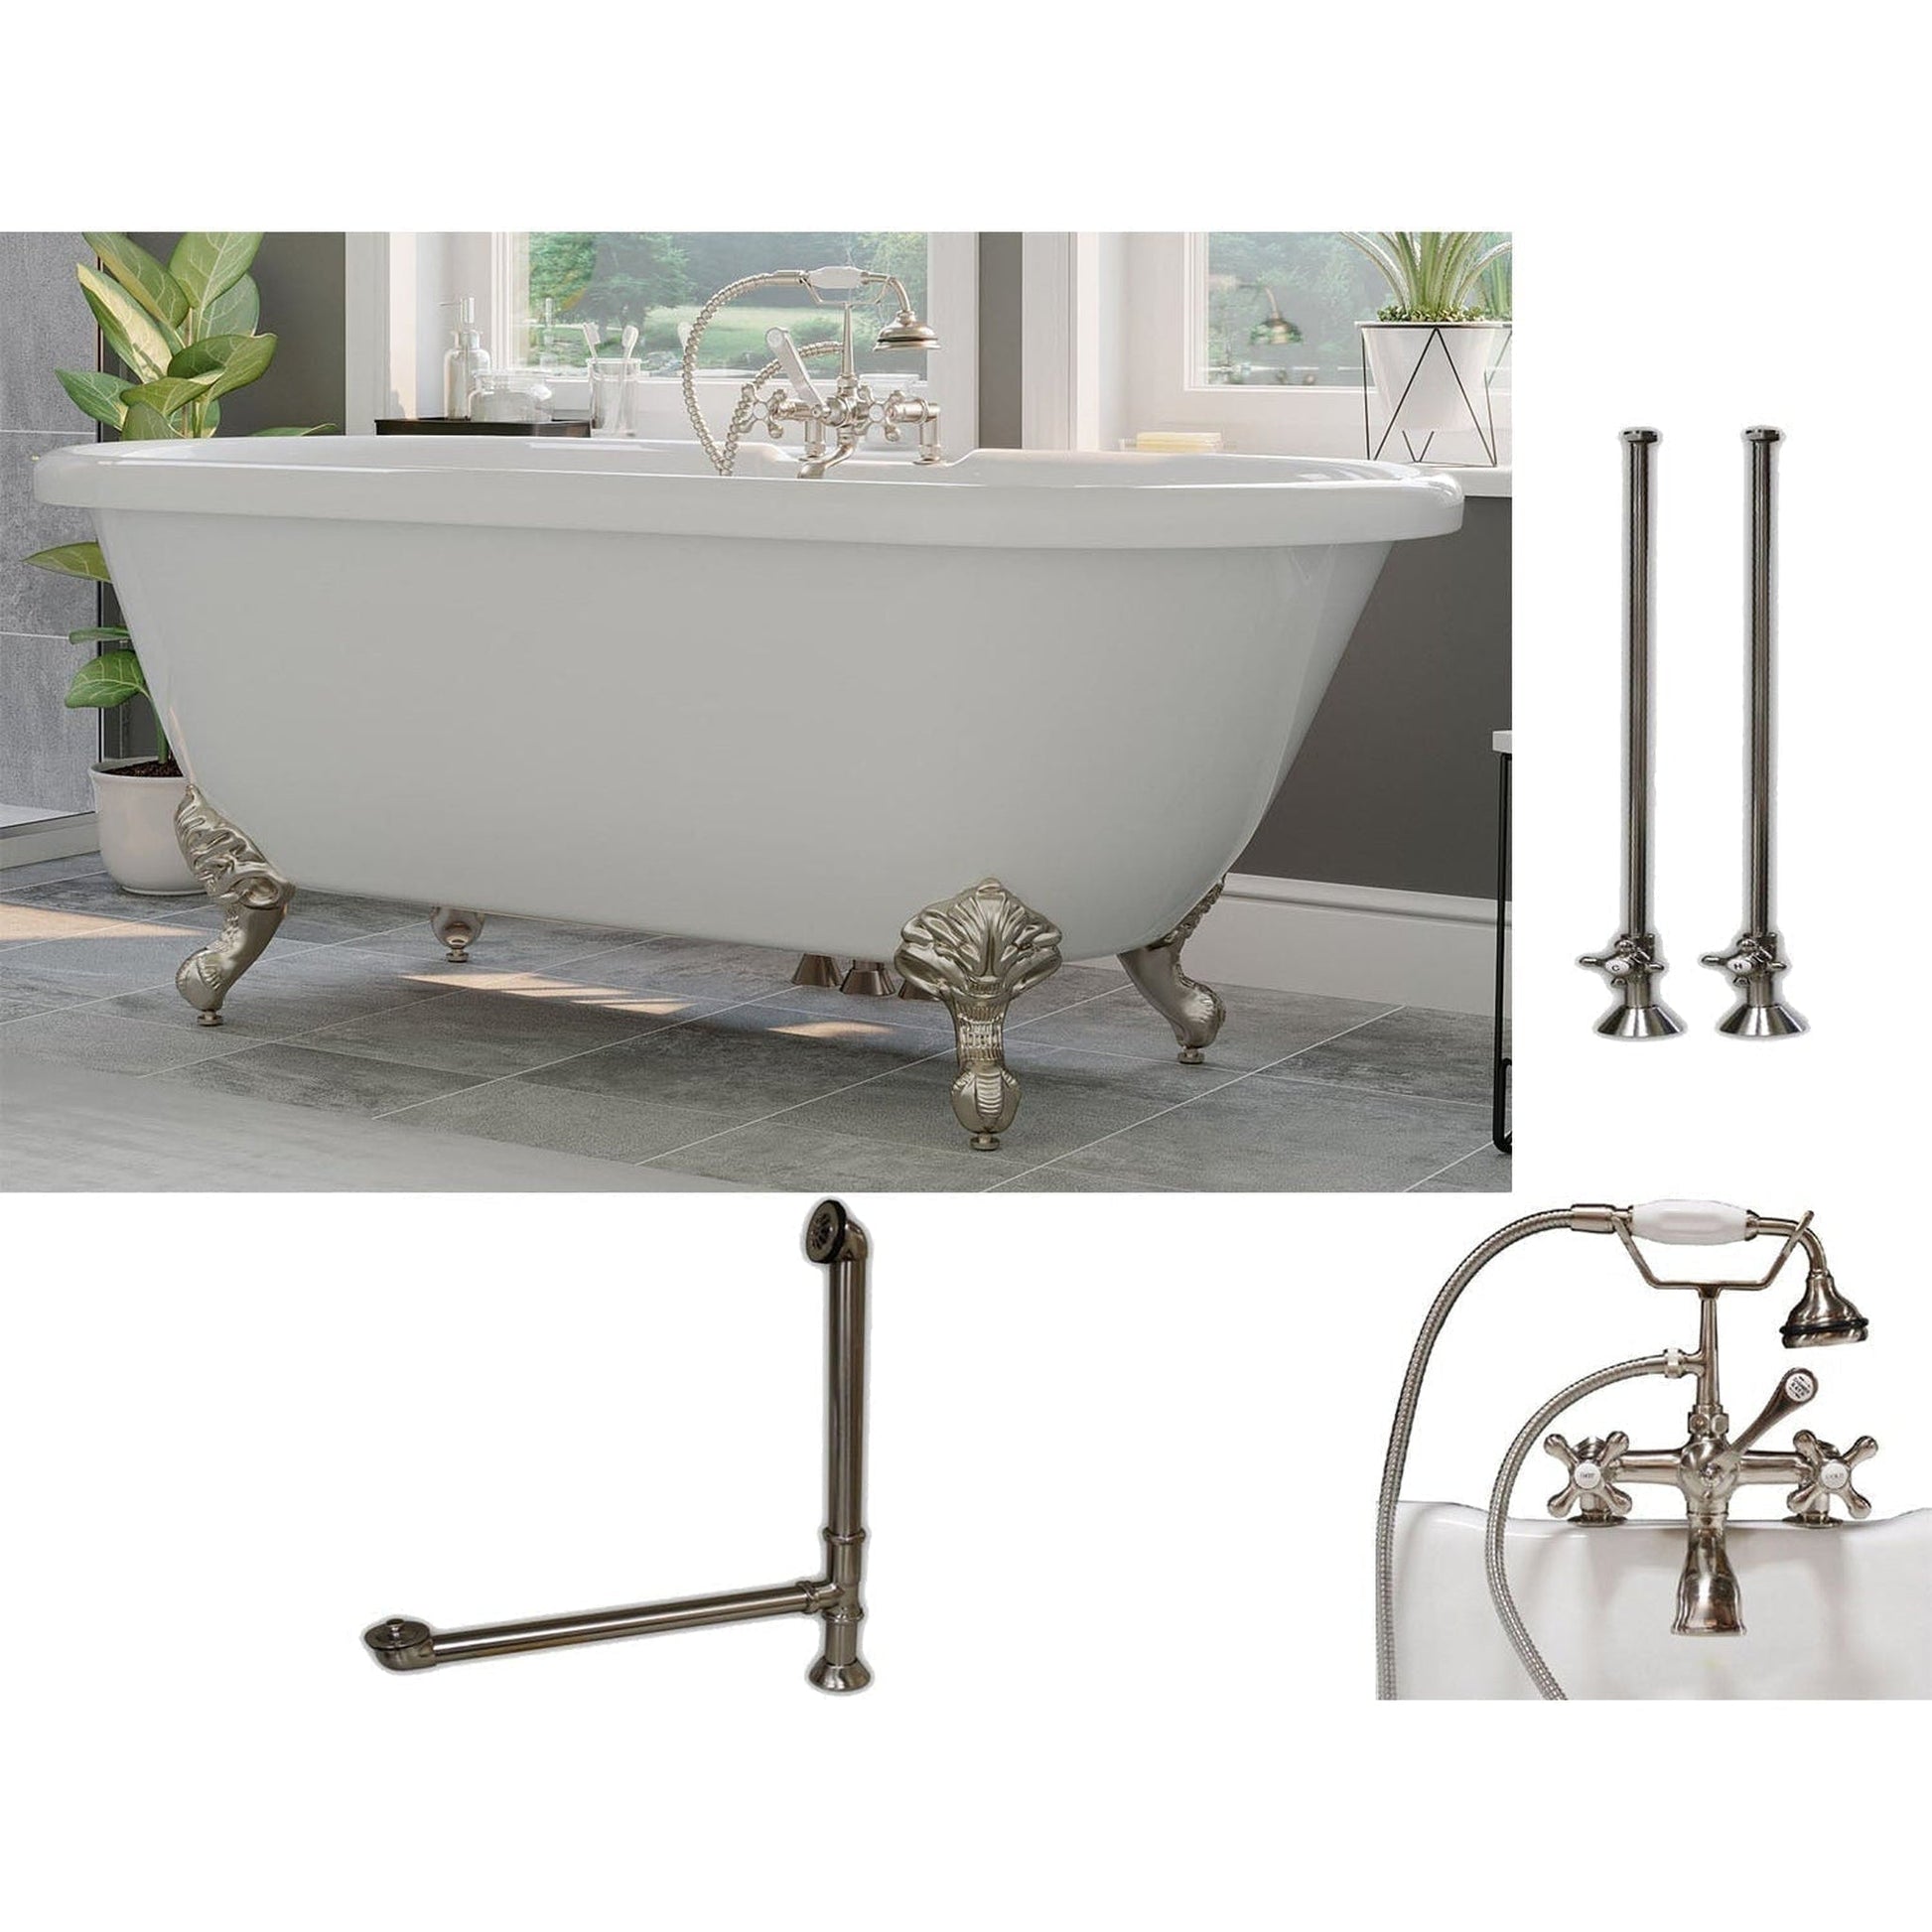 Cambridge Plumbing 60" White Acrylic Double Ended Clawfoot Bathtub With Deck Holes And Complete Plumbing Package Including 2” Riser Deck Mount Faucet, Supply Lines, Drain And Overflow Assembly In Brushed Nickel